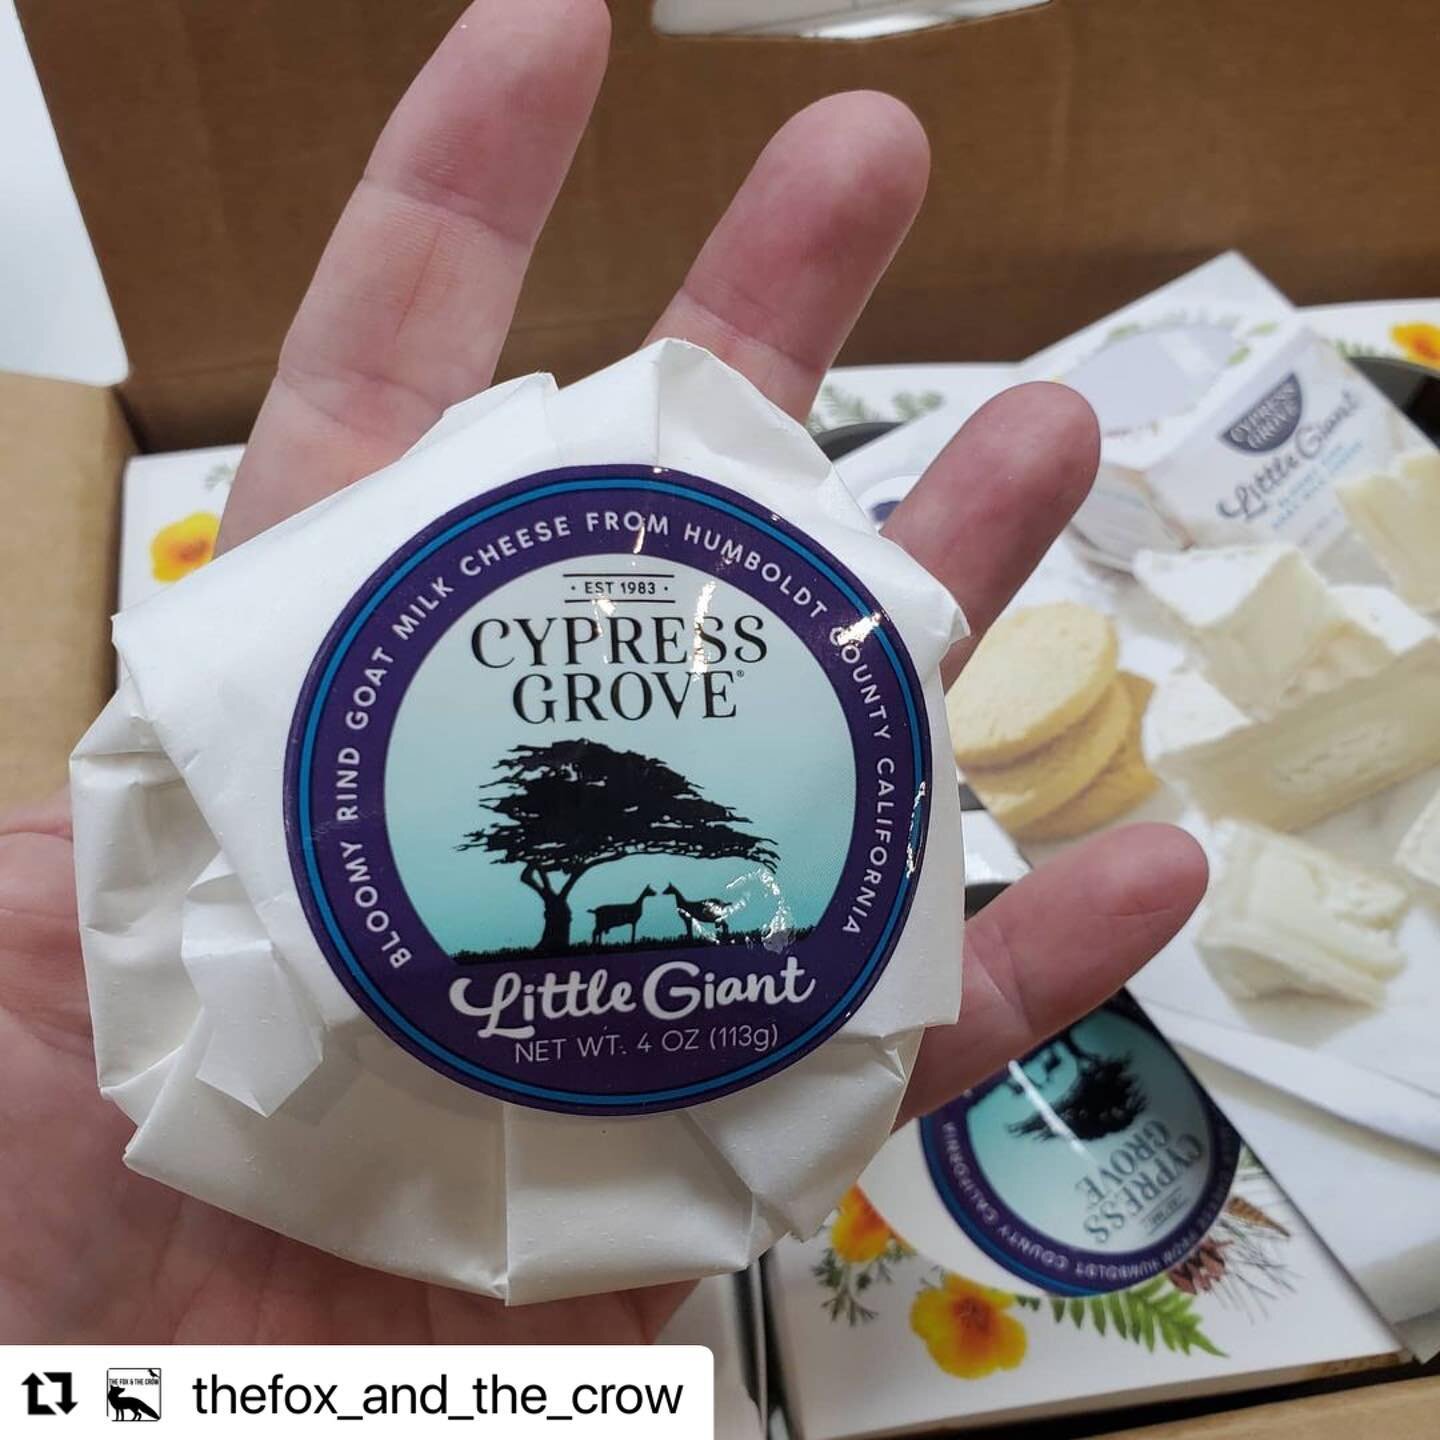 Palm-sized cheeses are perfect weekend treats! 

#Repost @thefox_and_the_crow with @make_repost
・・・
Brand new goat cheese from @cypressgrovers ❤ Little Giant is a mini goats milk brie that is fantastic with an IPA or any sparkling wine. Bright and fu